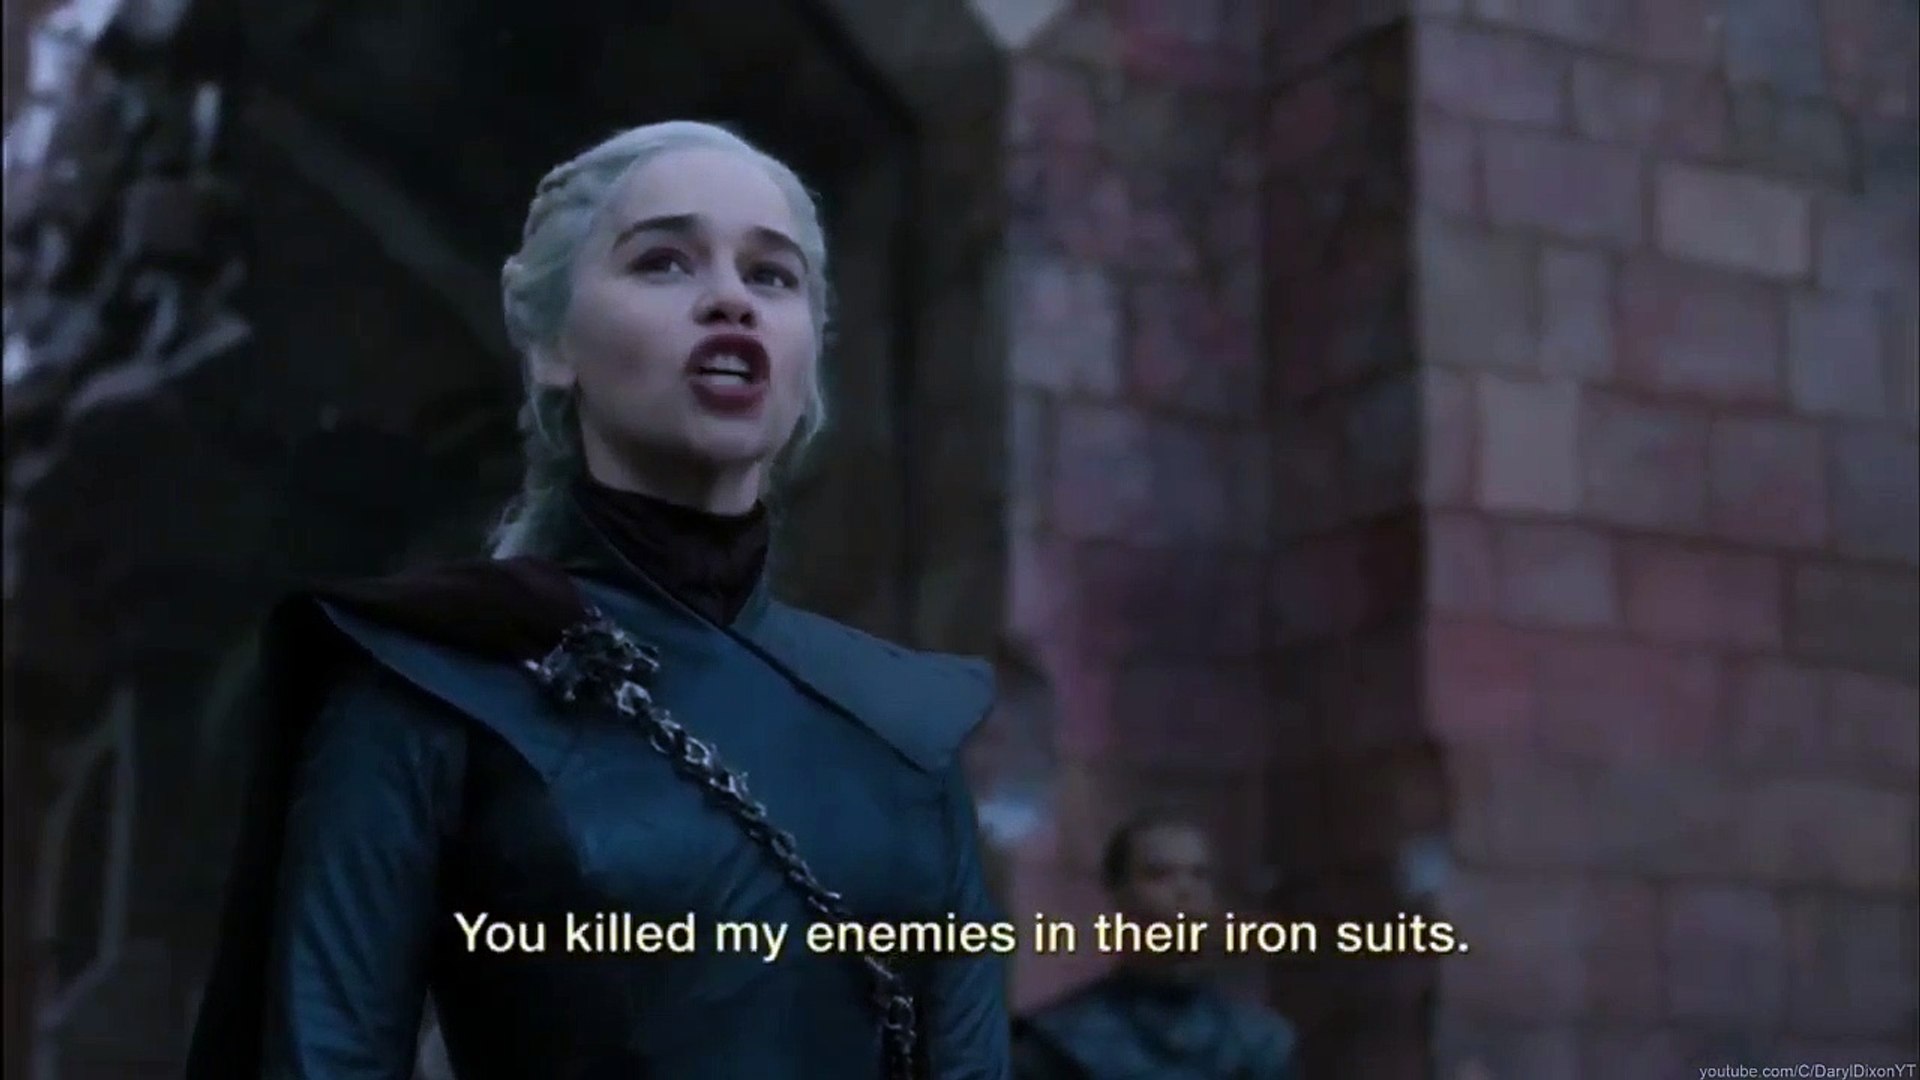 Daenerys' Victory Speech - Tyrion Arrested - The End! - video Dailymotion